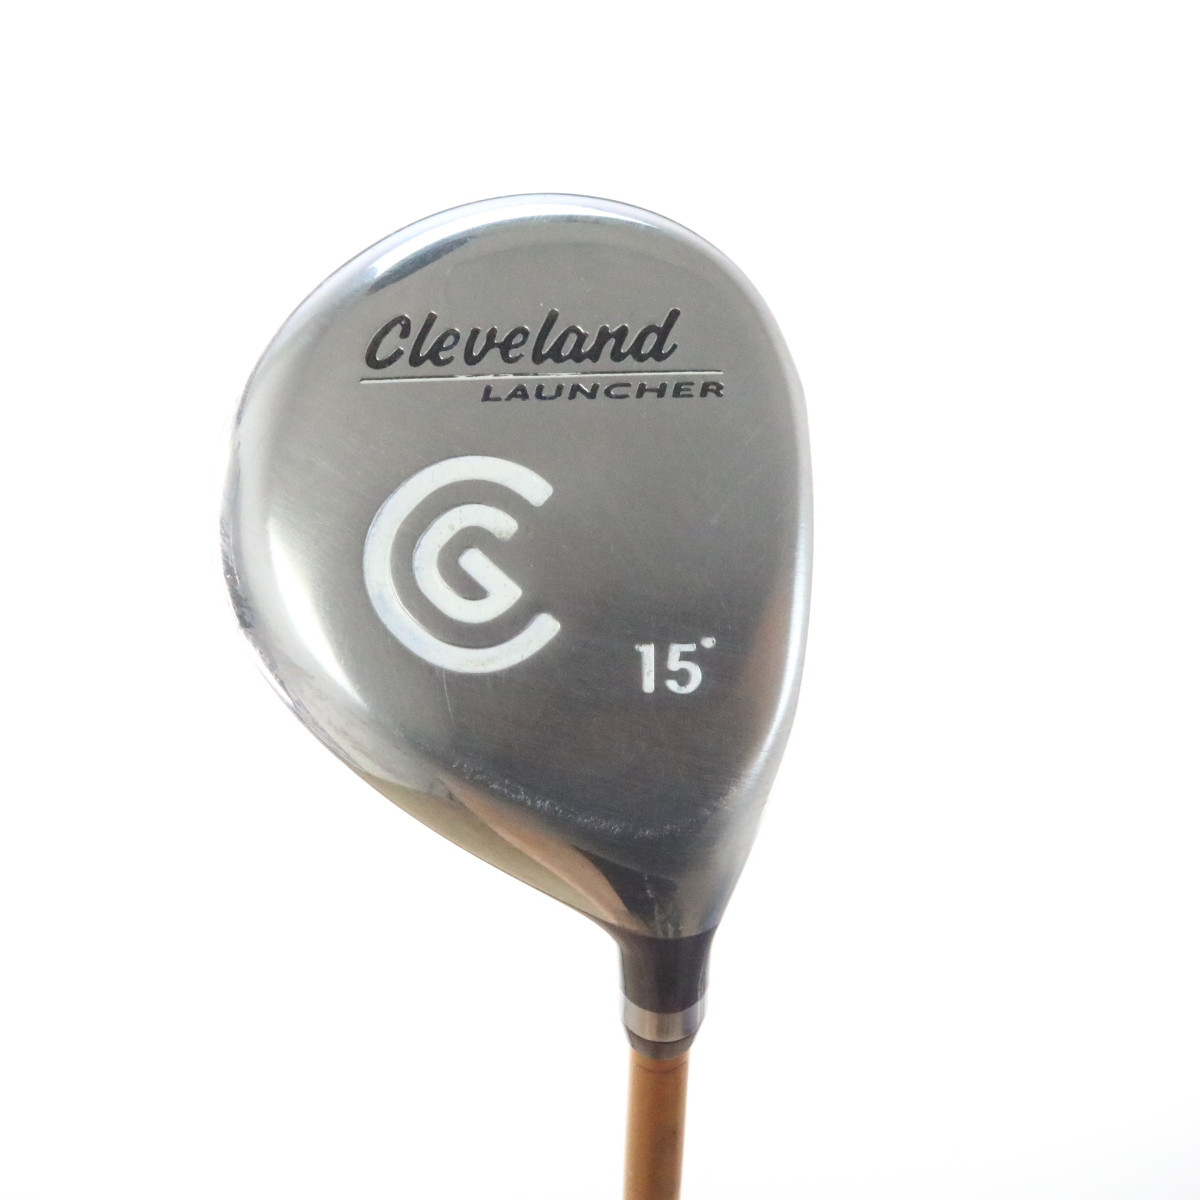 witb cleveland launcher dst 3 wood